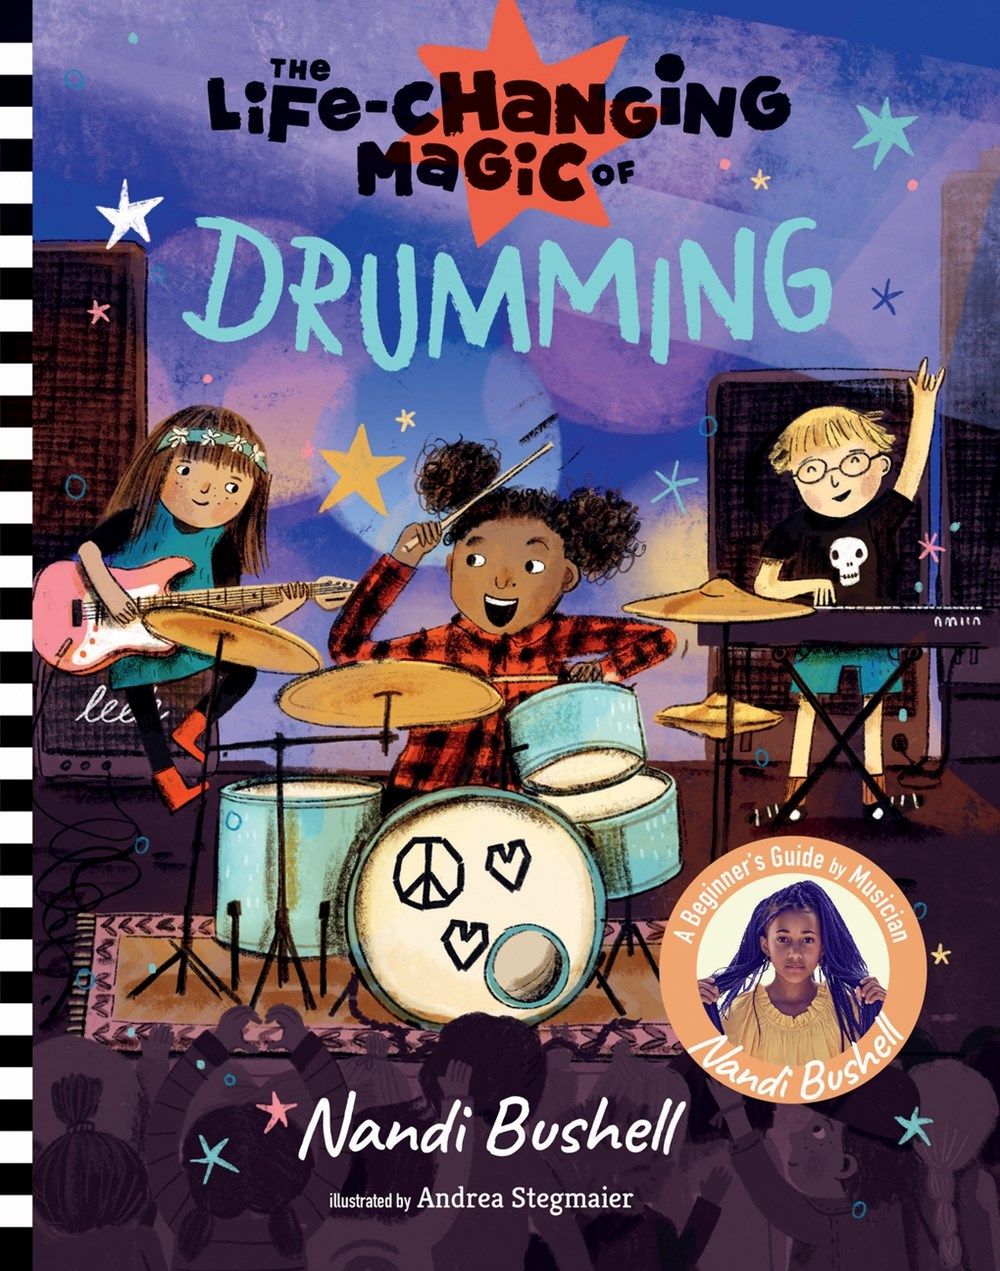 Cover of The Life-Changing Magic of Drumming by Nandi Bushell, illustrated by Andrea Stegmaier